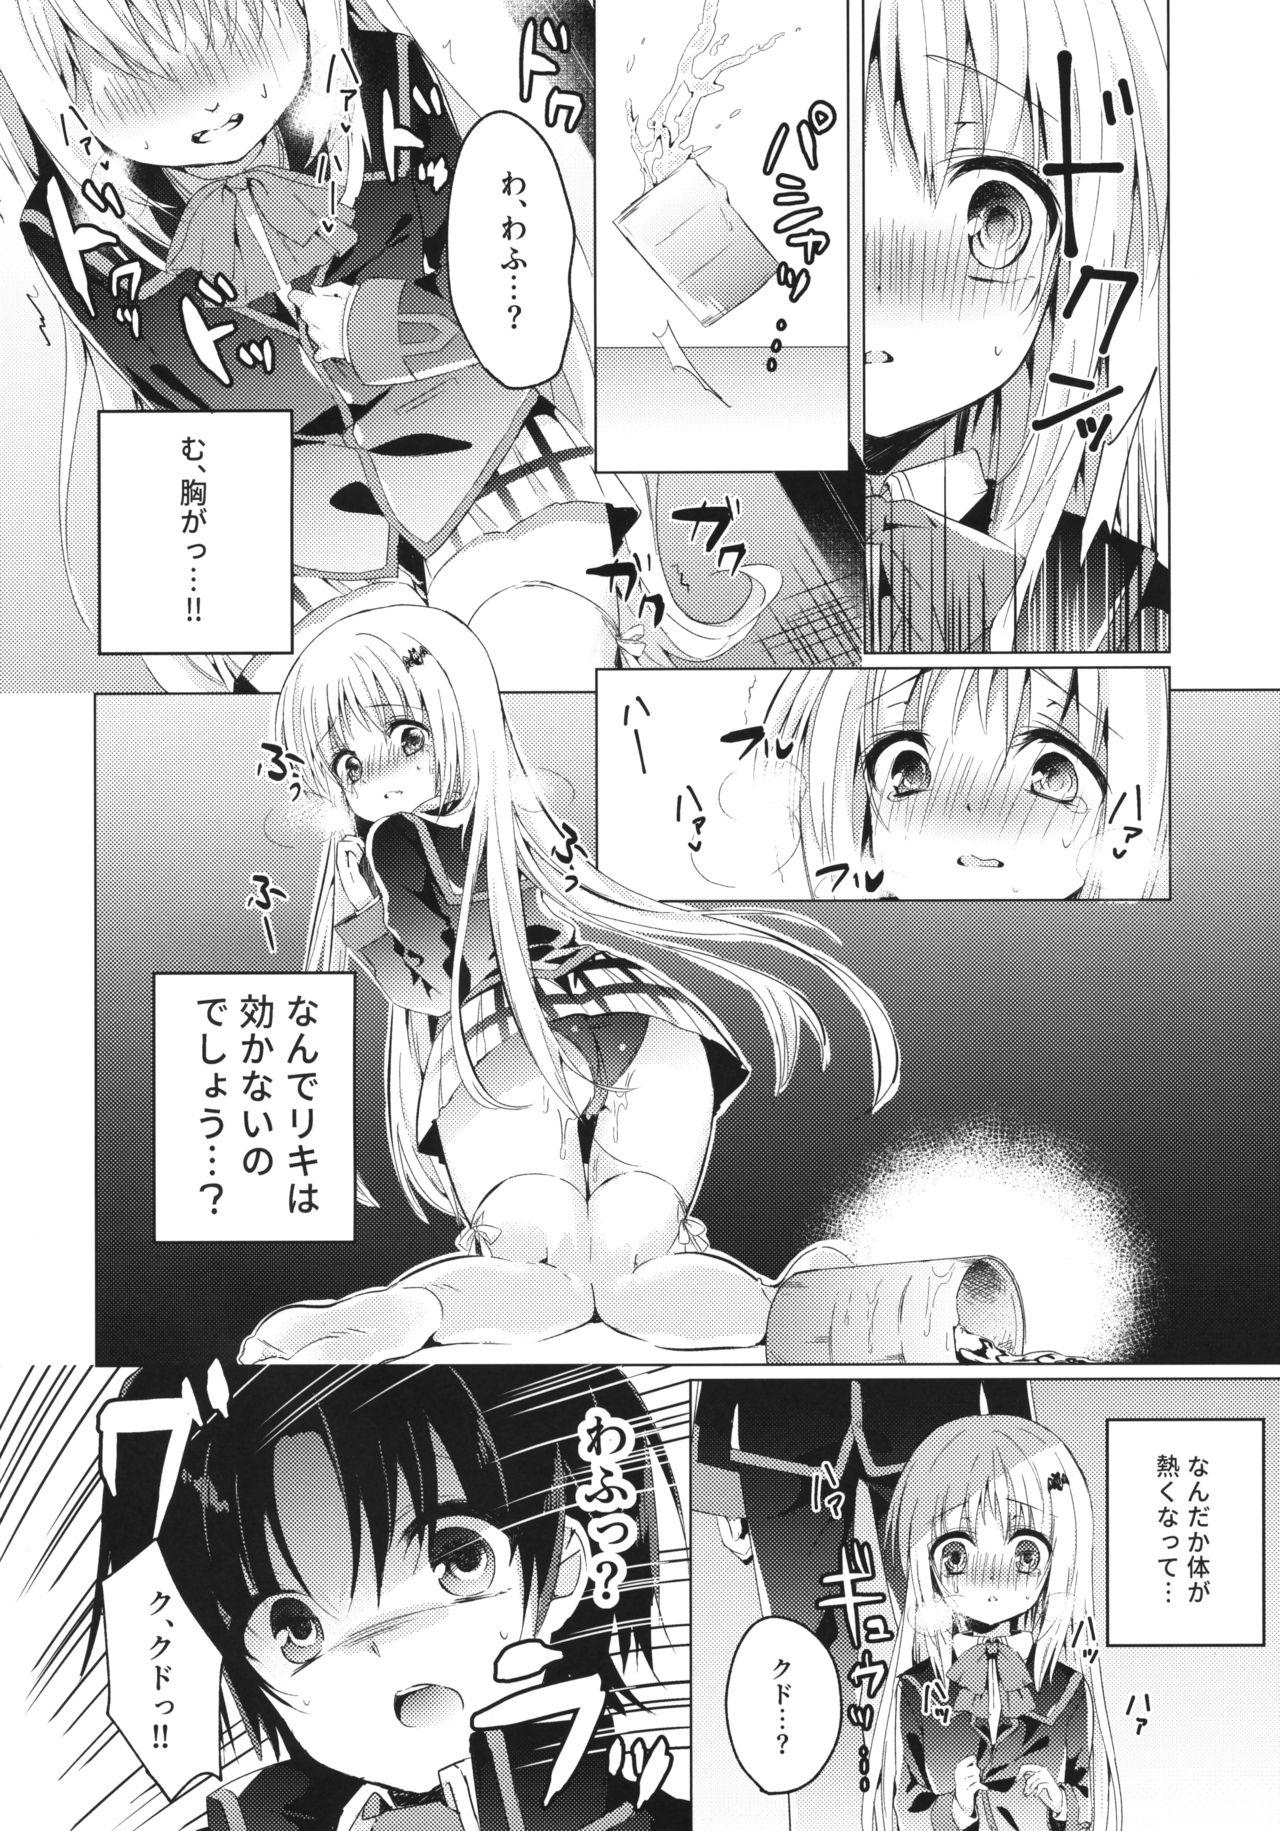 Mofos Kud After2 - Little busters Exgirlfriend - Page 5